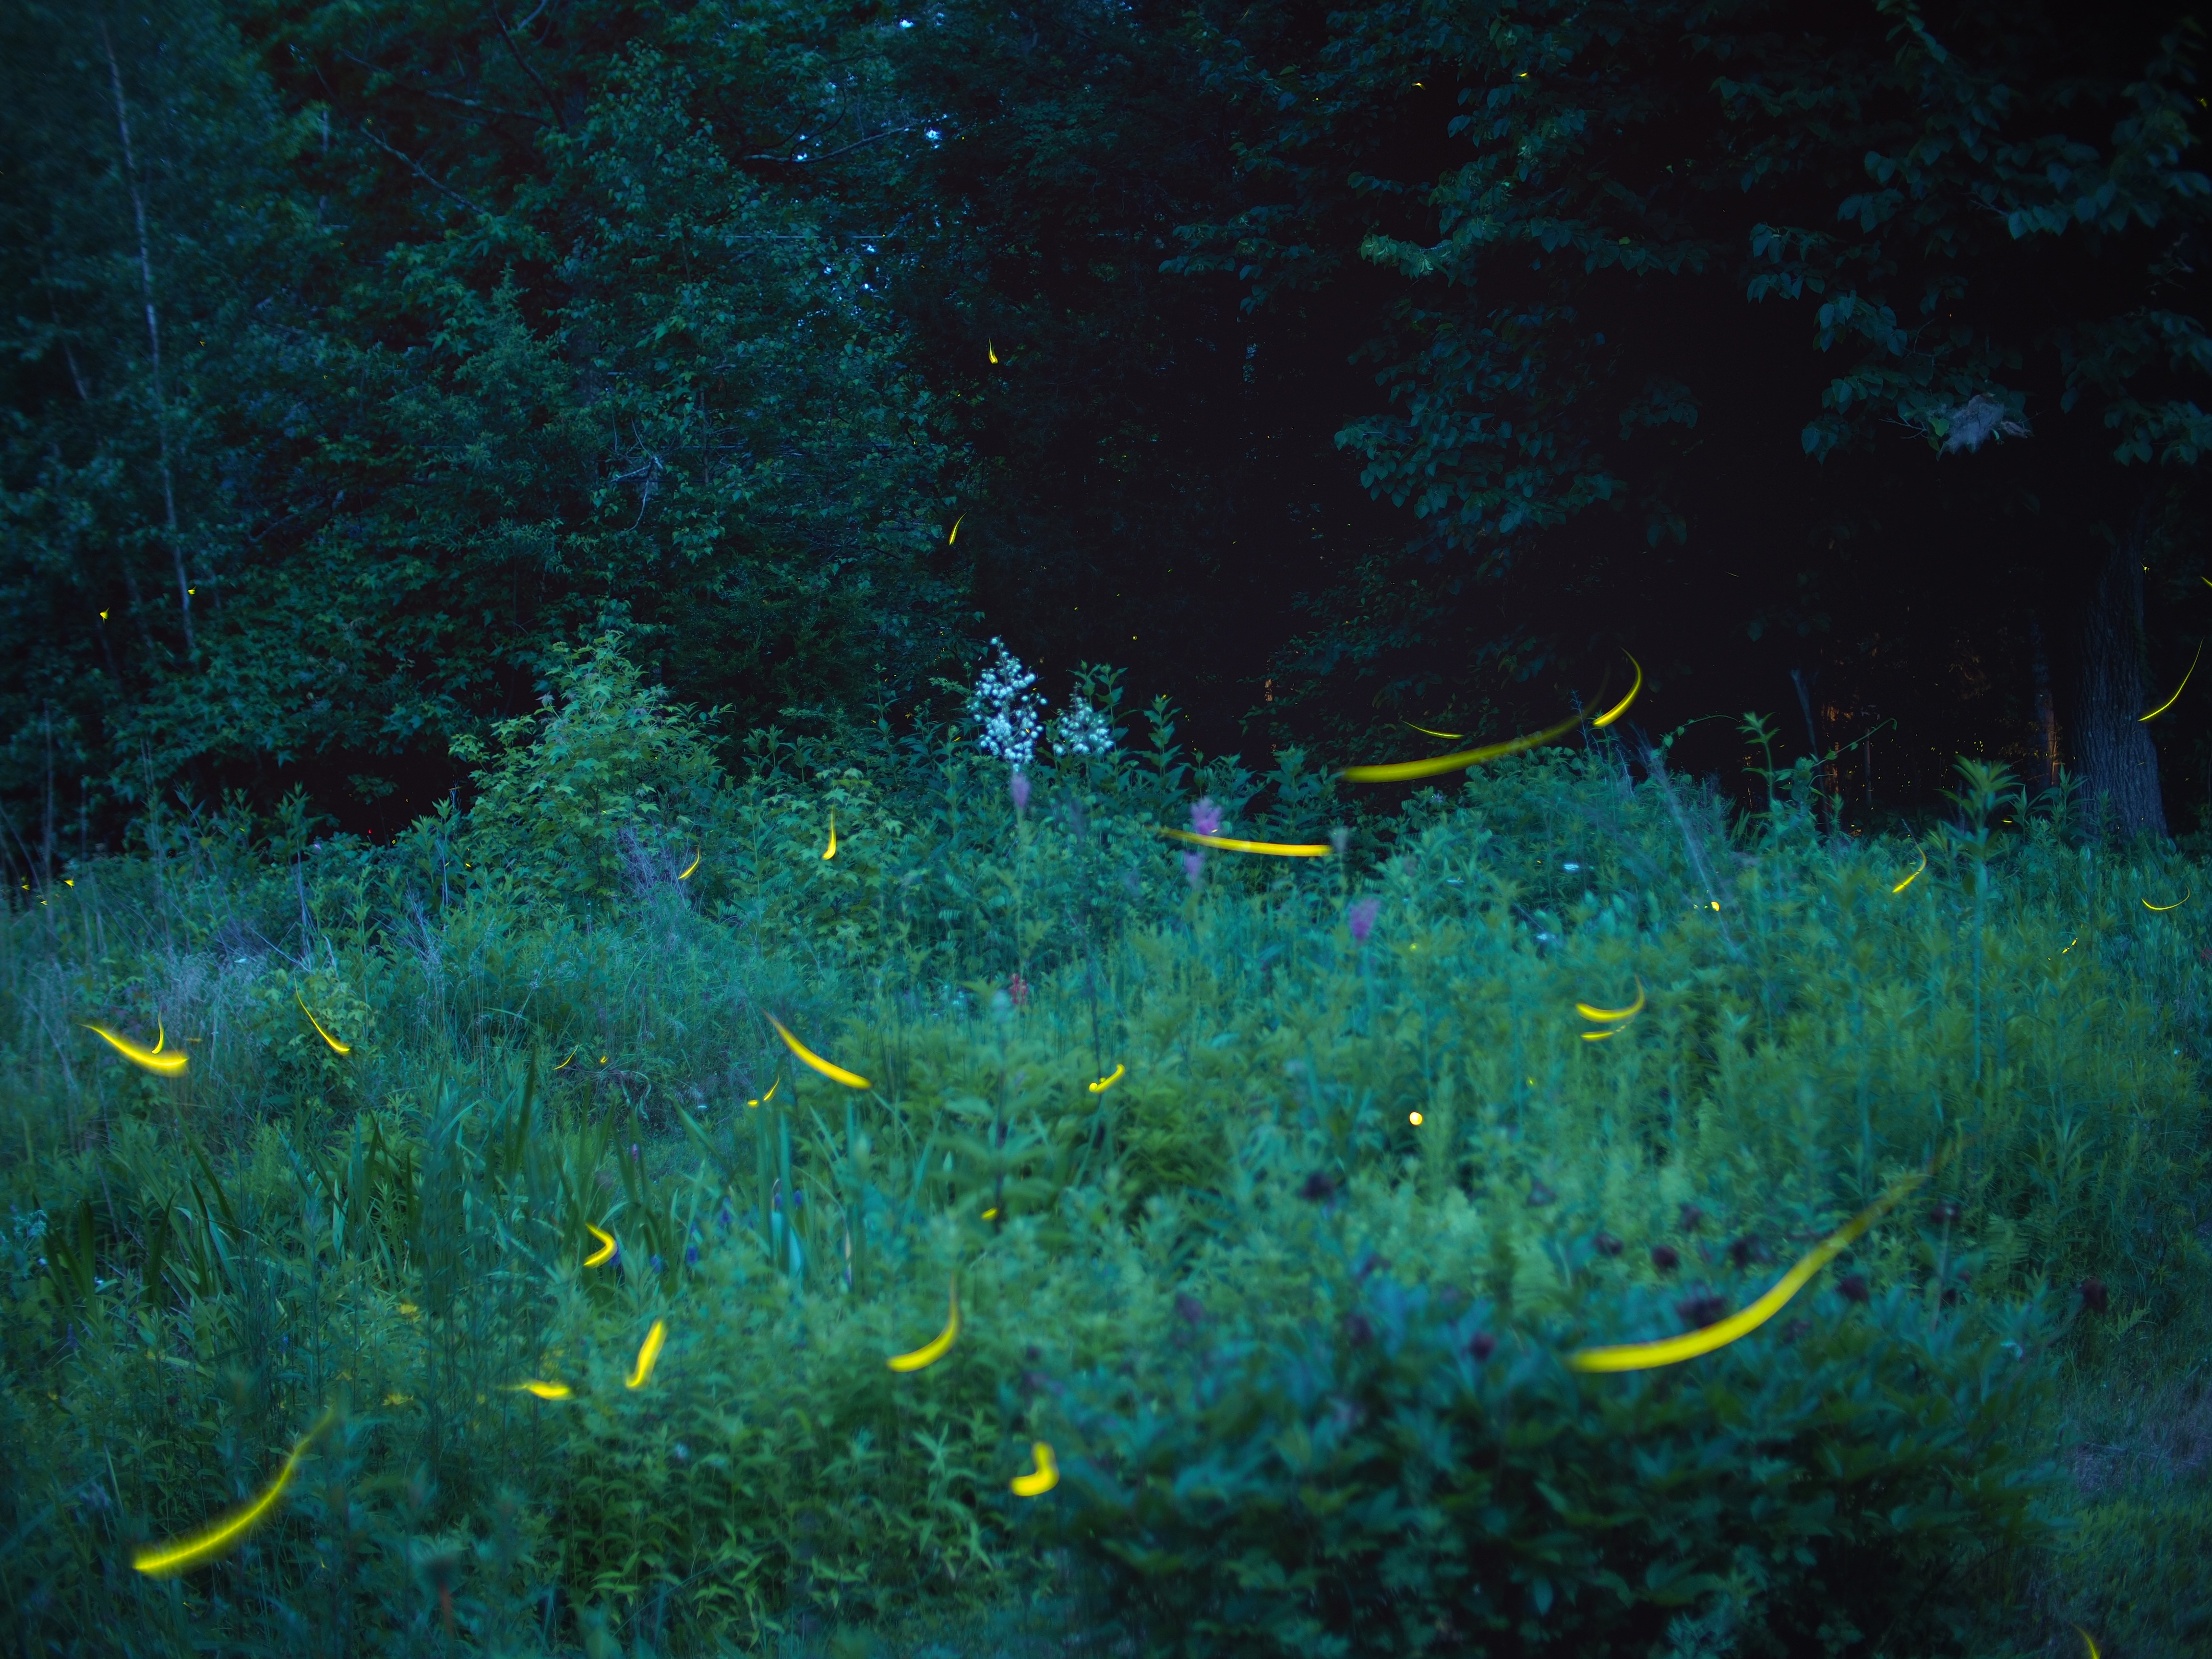 "Fireflies are charismatic beetles best known for their bioluminescent flashes and light shows as shown here"